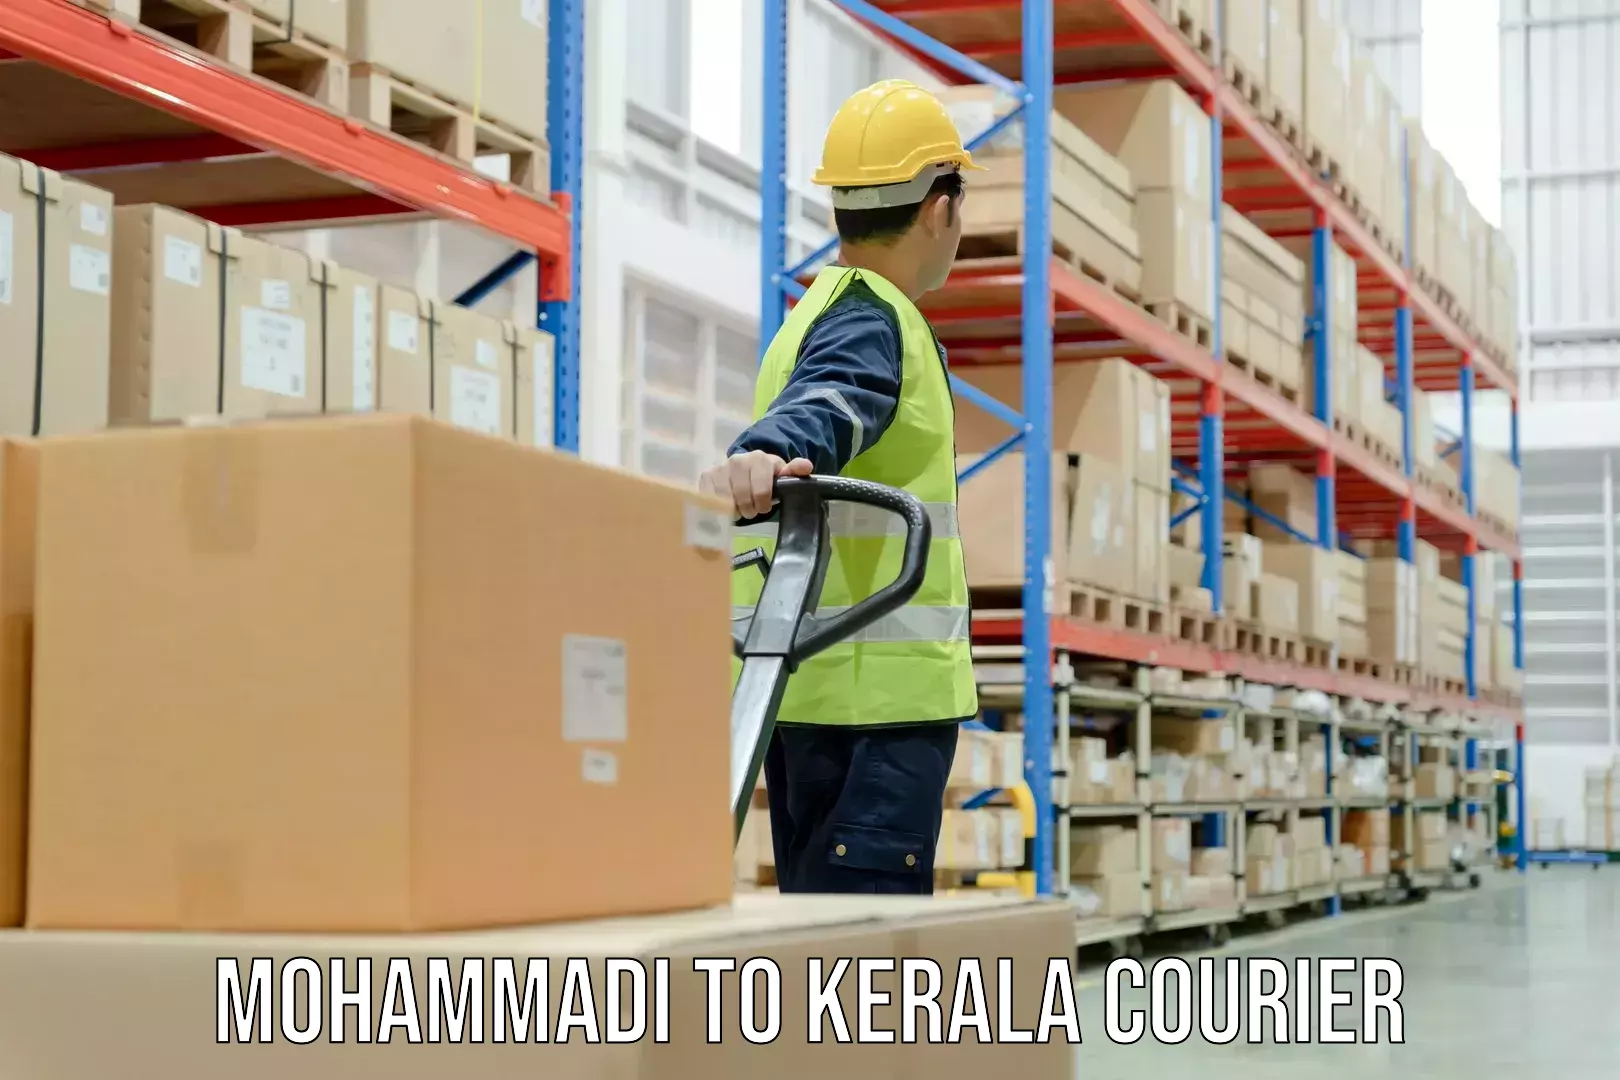 Reliable delivery network Mohammadi to Kerala